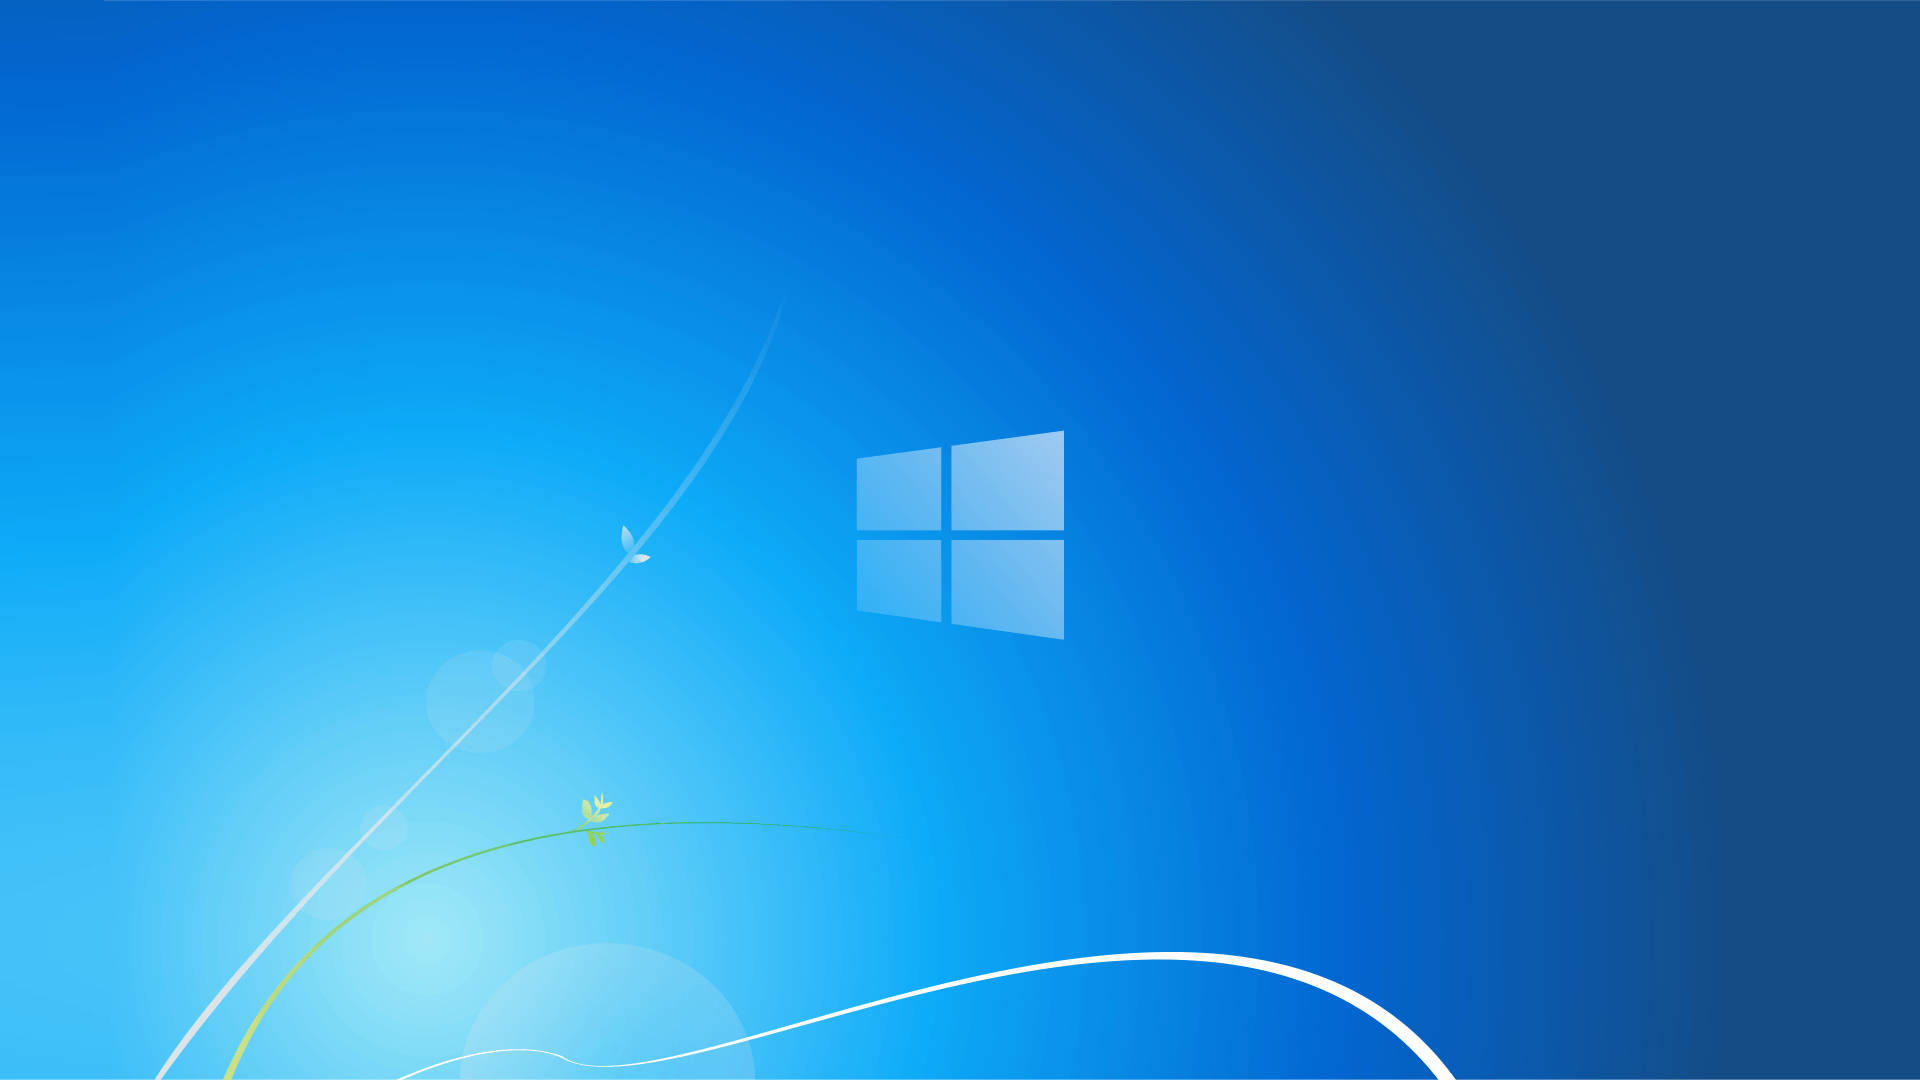 The bright blue interface of Windows 7 Wallpaper